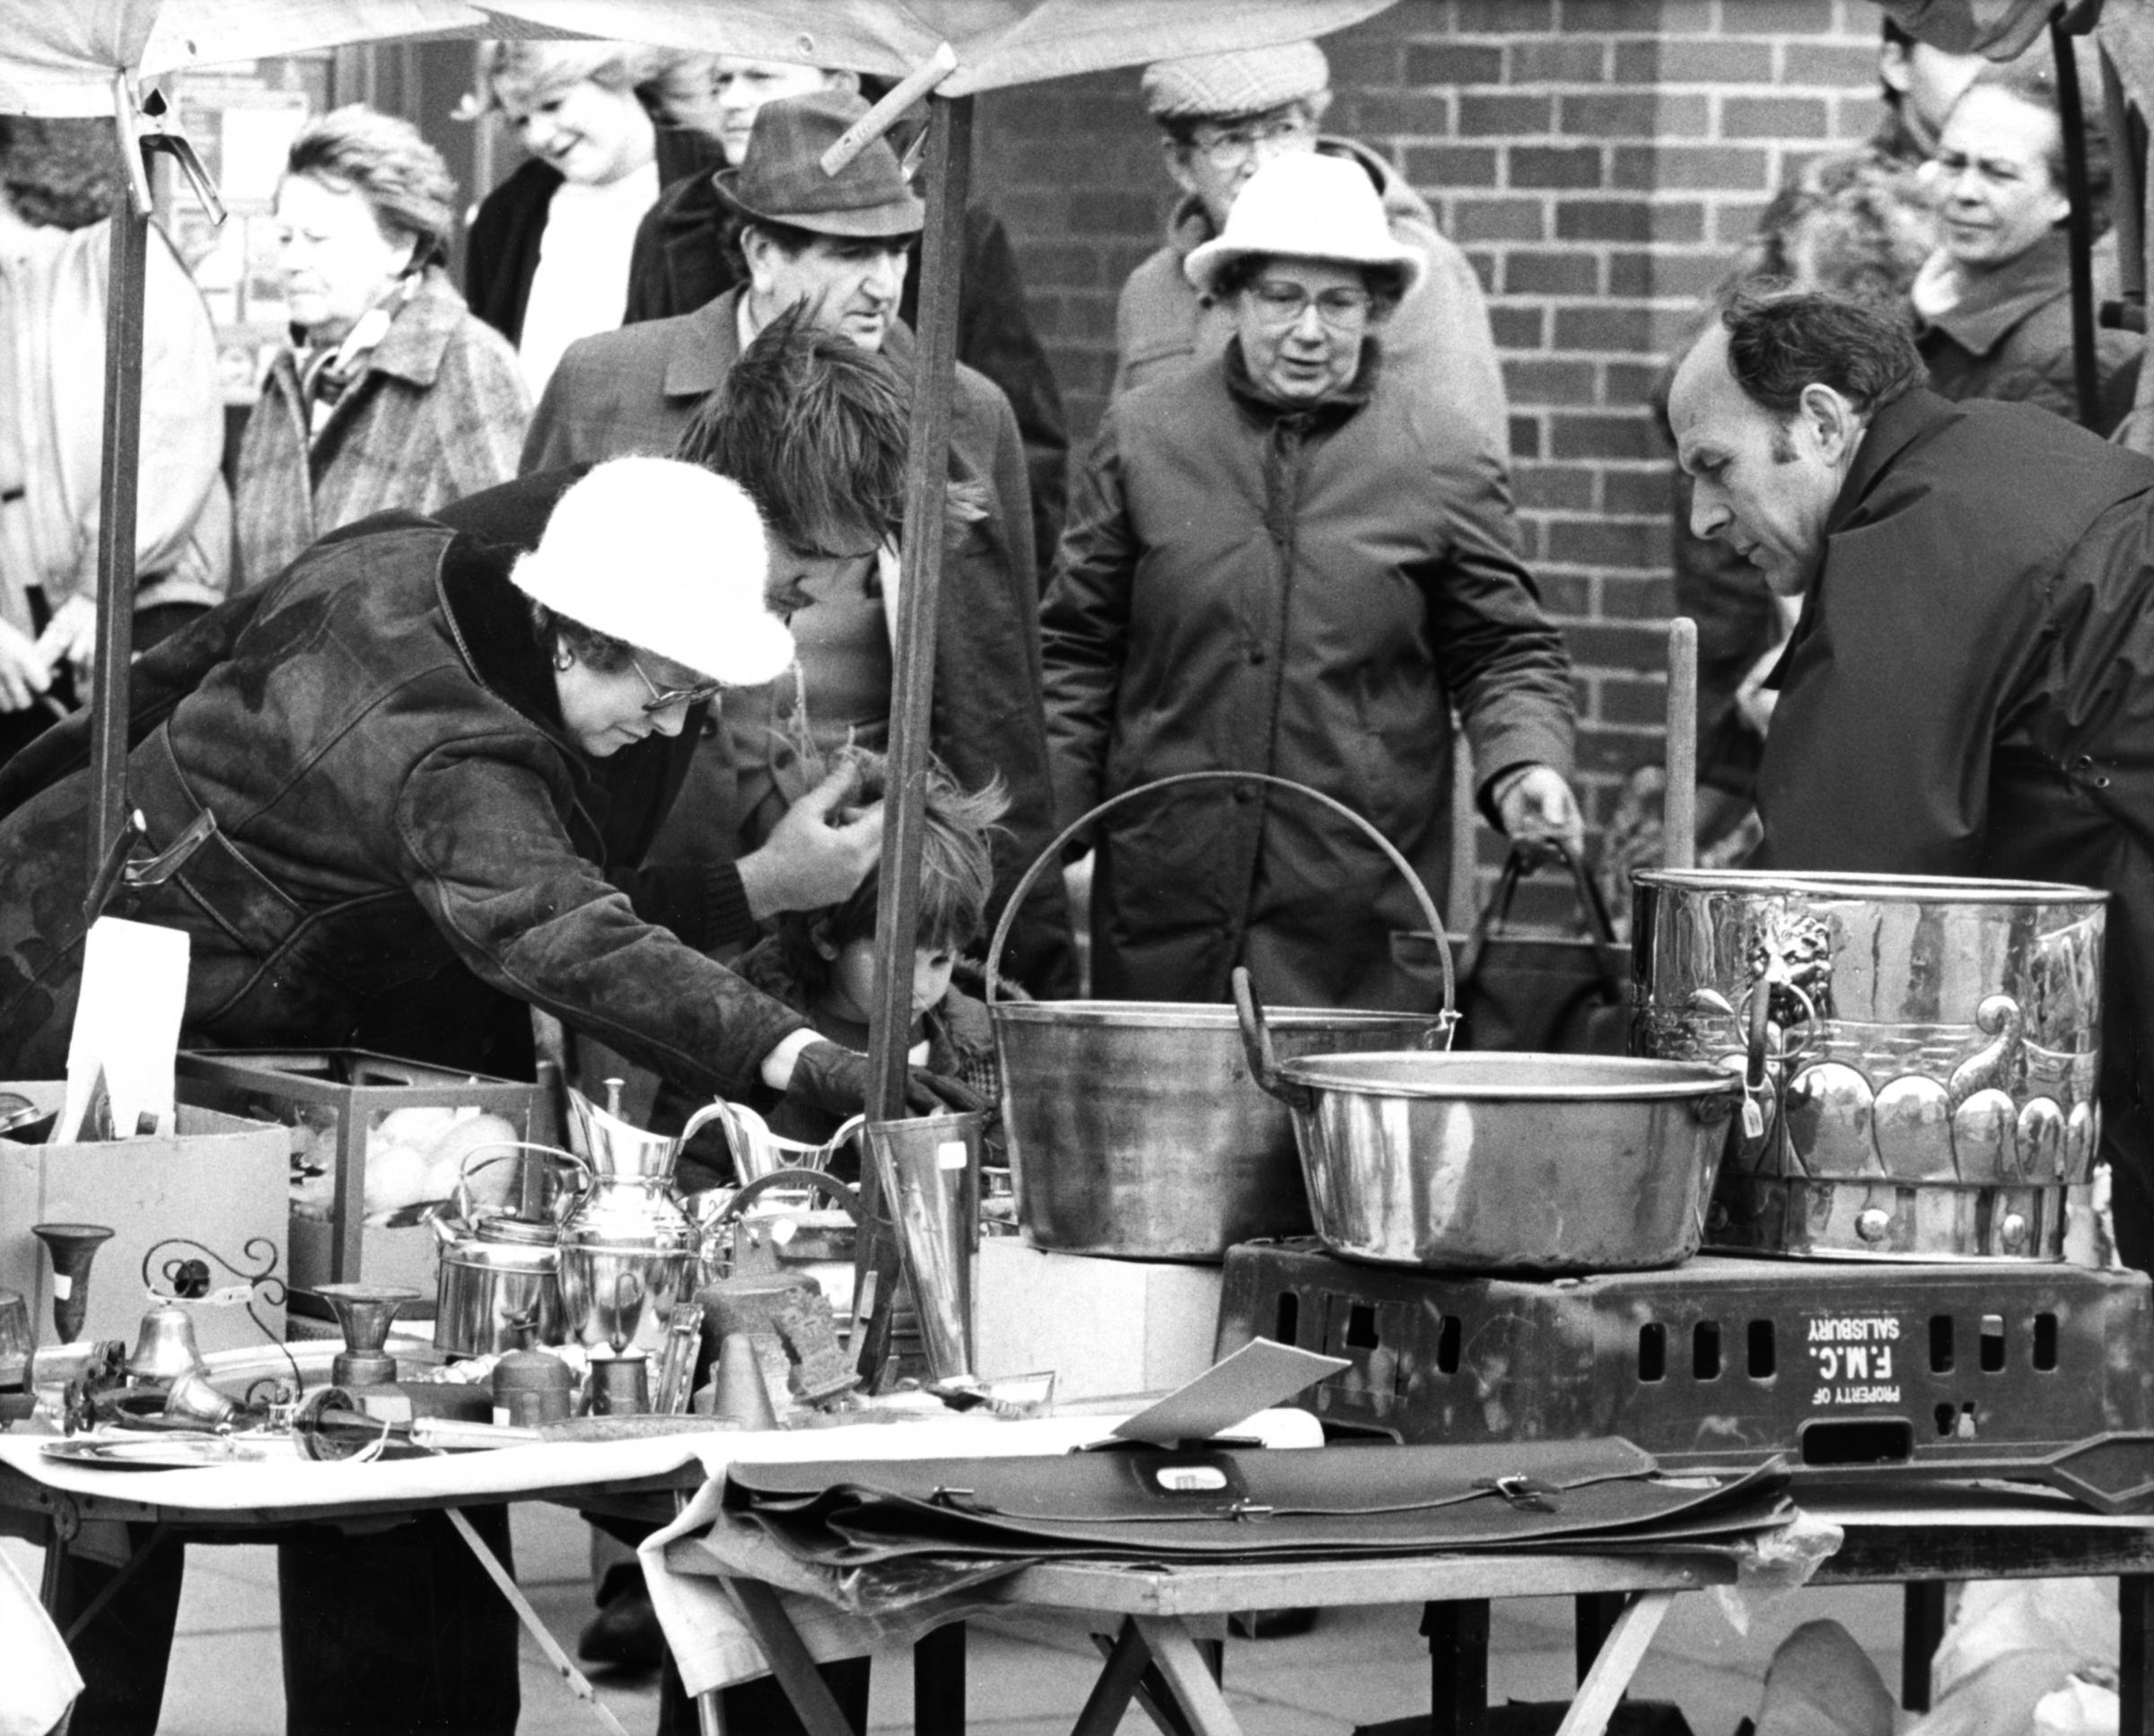 Lymington Market on a Saturday, where shoppers would flock to snap up everything from brass to bananas. December 29, 1985. THE SOUTHERN DAILY ECHO ARCHIVES. HAMPSHIRE HERITAGE SUPPLEMENT.